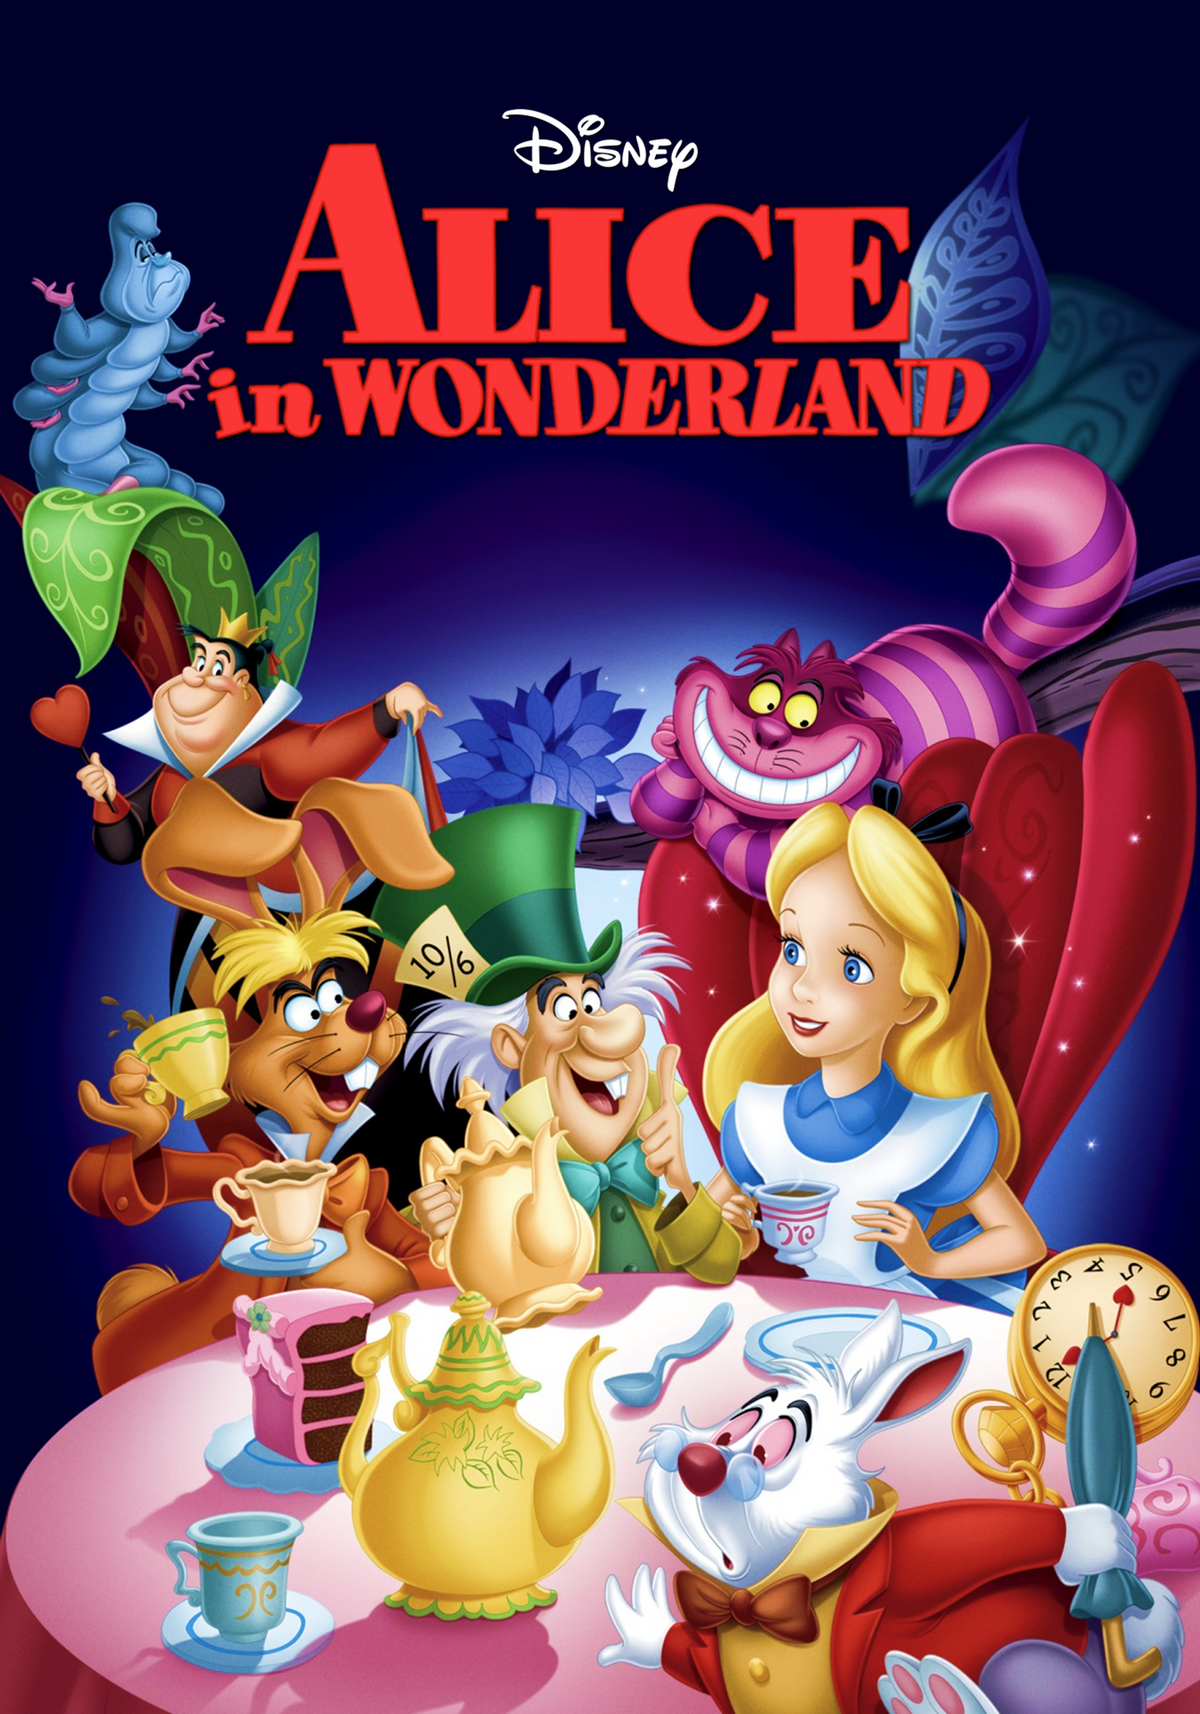 https://static.wikia.nocookie.net/disney-fan-fiction/images/f/fa/Alice_in_Wonderland_-_Poster.png/revision/latest/scale-to-width-down/1200?cb=20160302182107